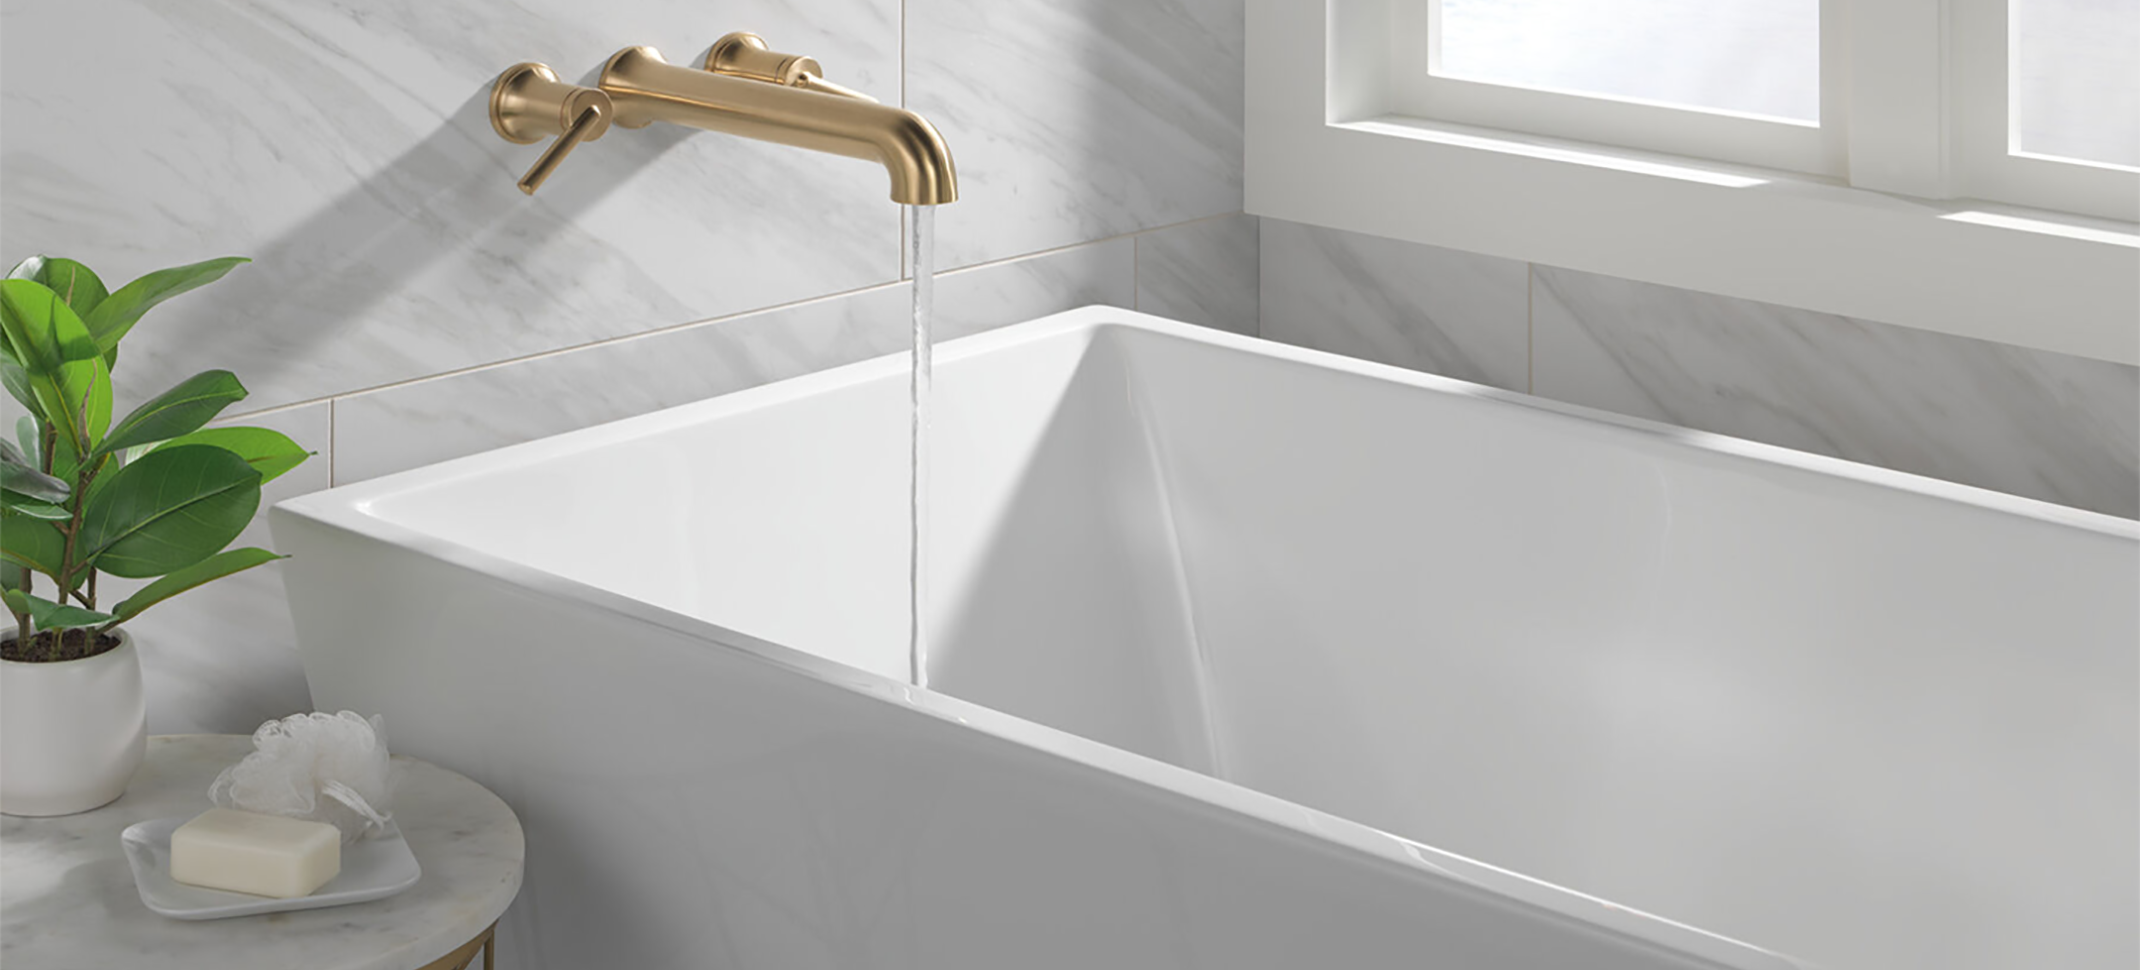 Plumbing Deals - Tub Faucets and Spouts